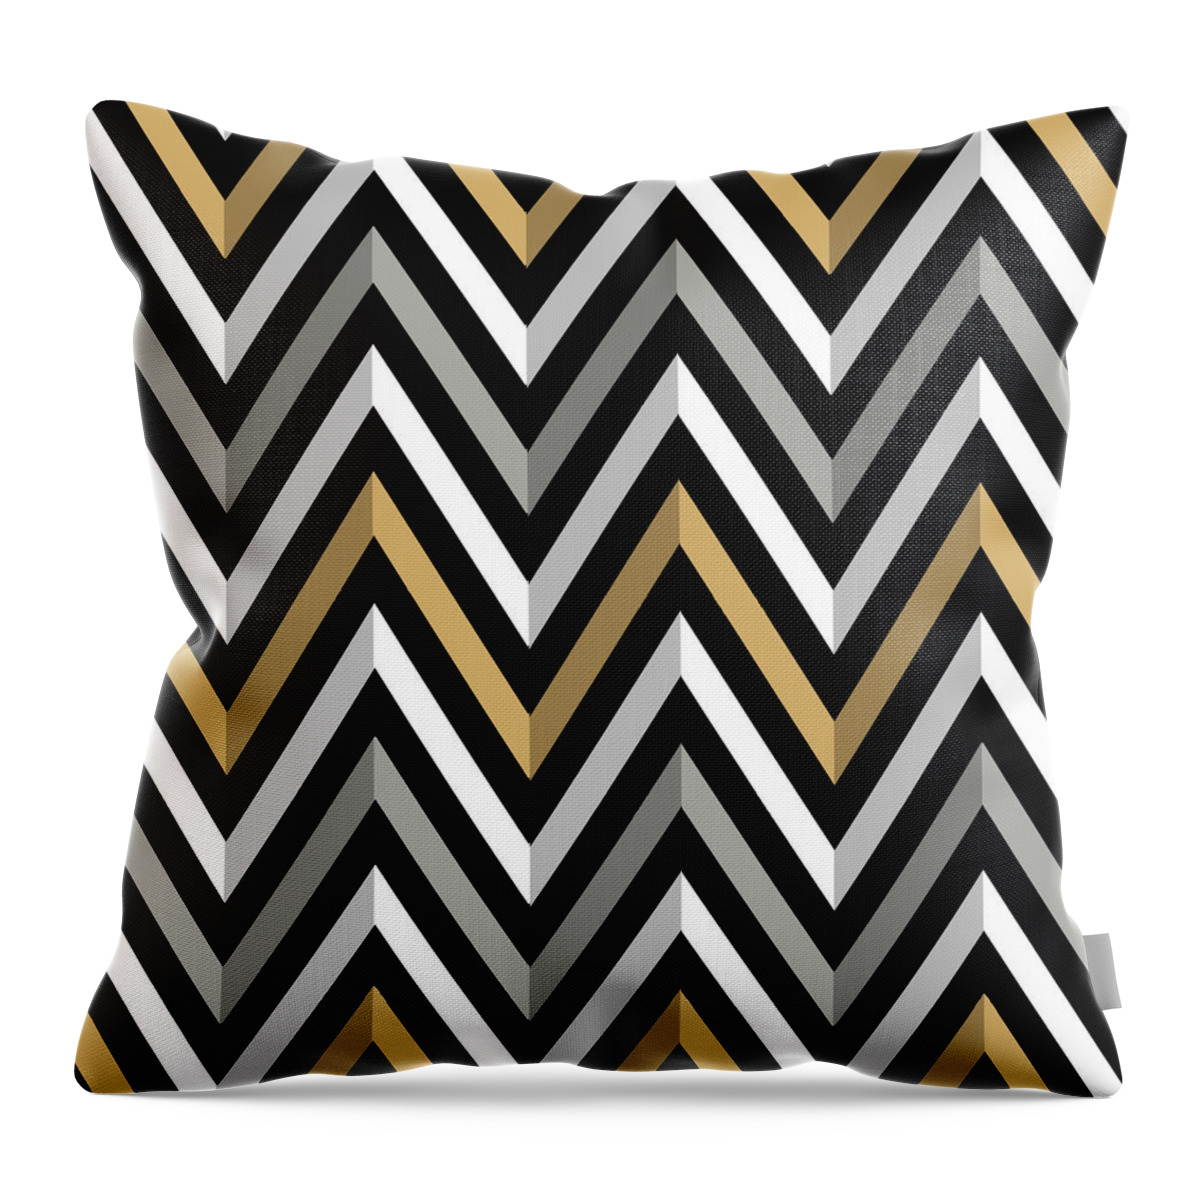 Staley Throw Pillow featuring the digital art Chevrons by Chuck Staley